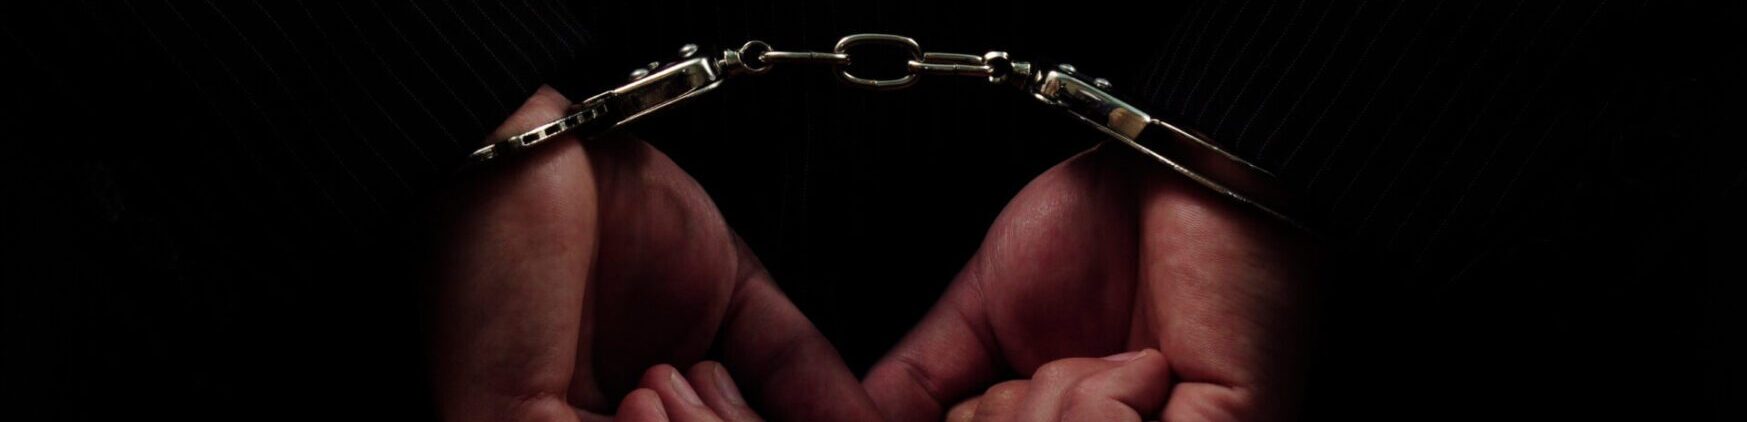 hands in handcuffs cropped